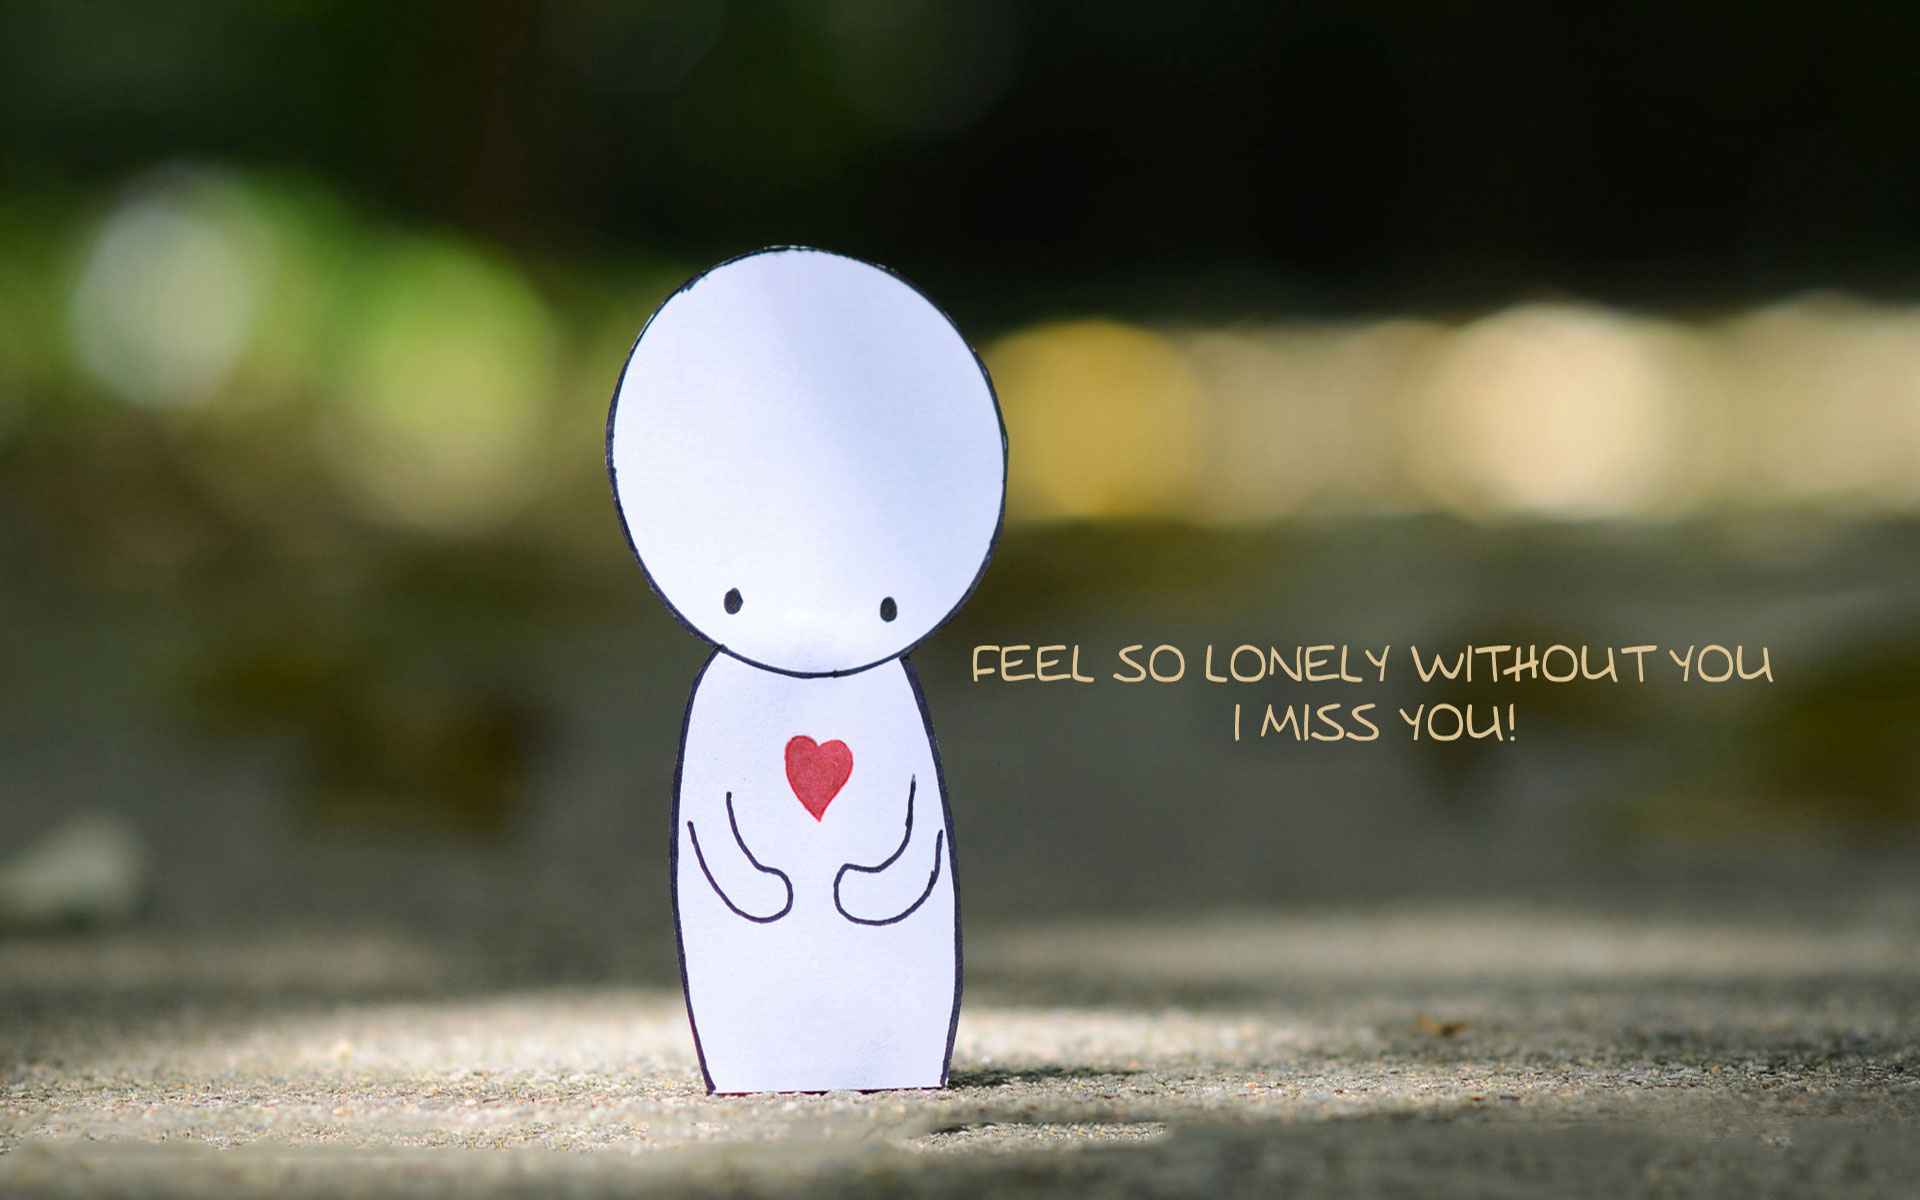 HD I Miss You Wallpaper For Him Or Her Romantic Chobirdokan